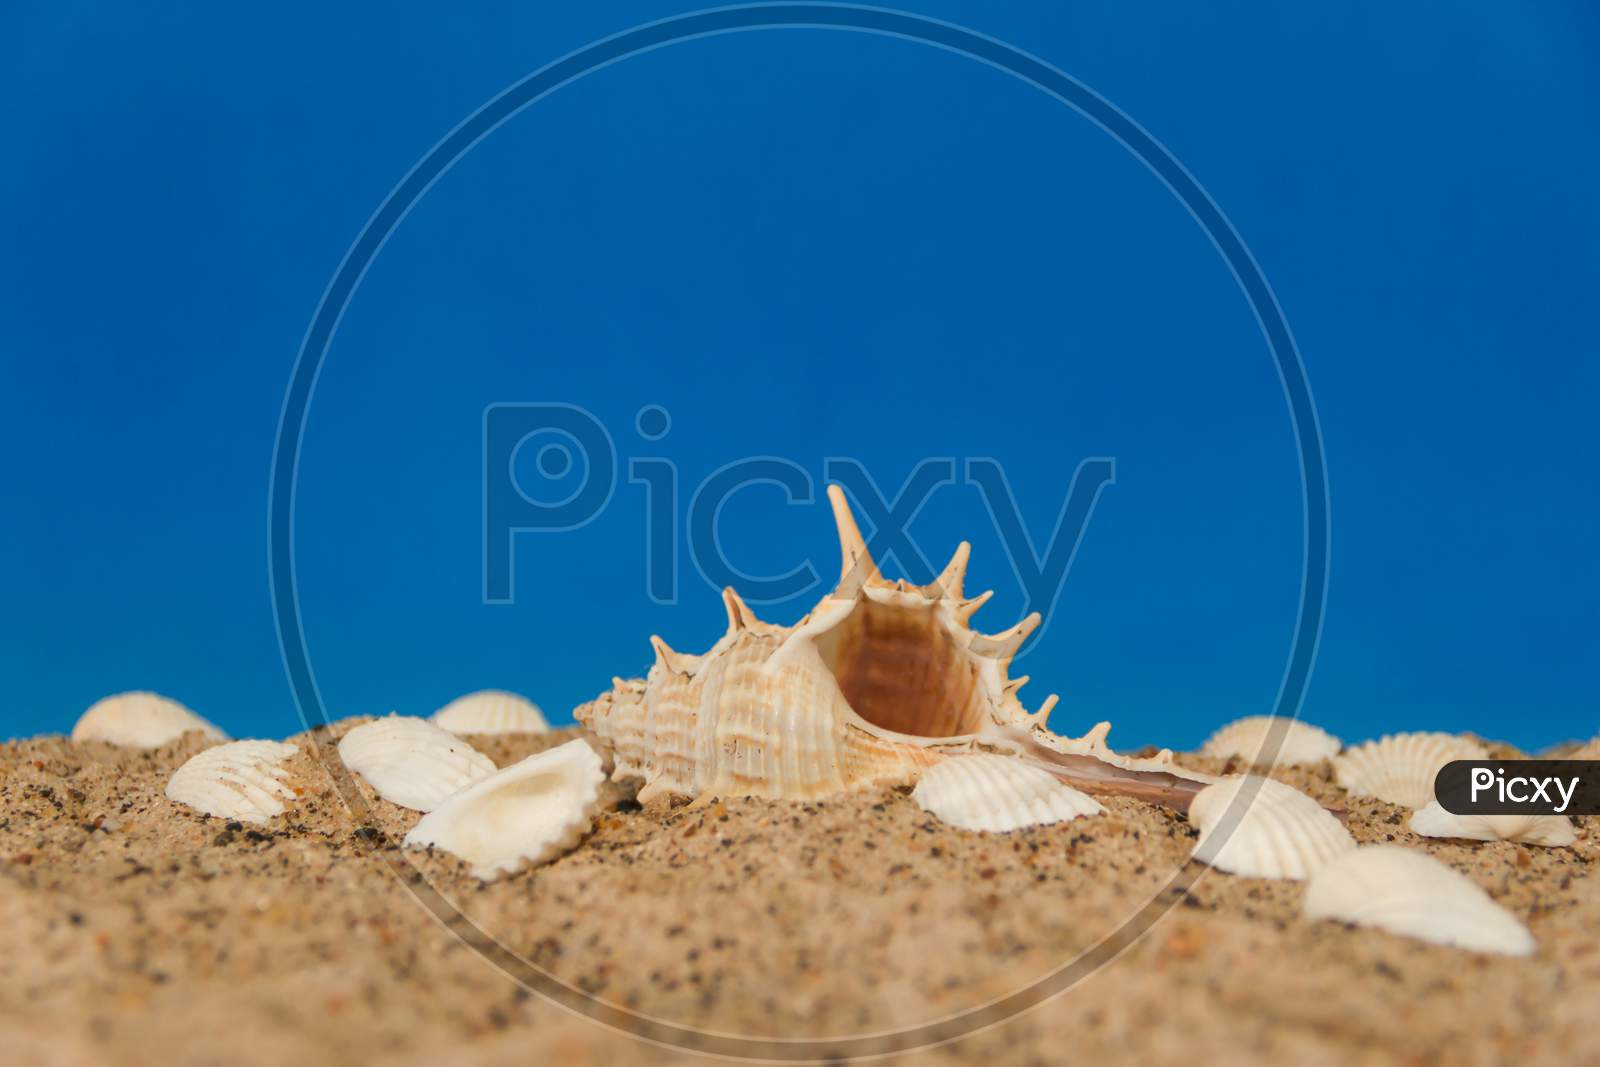 Minimalist Background Representing The Summer With Snails Clams Goggles And Sand On Celestial